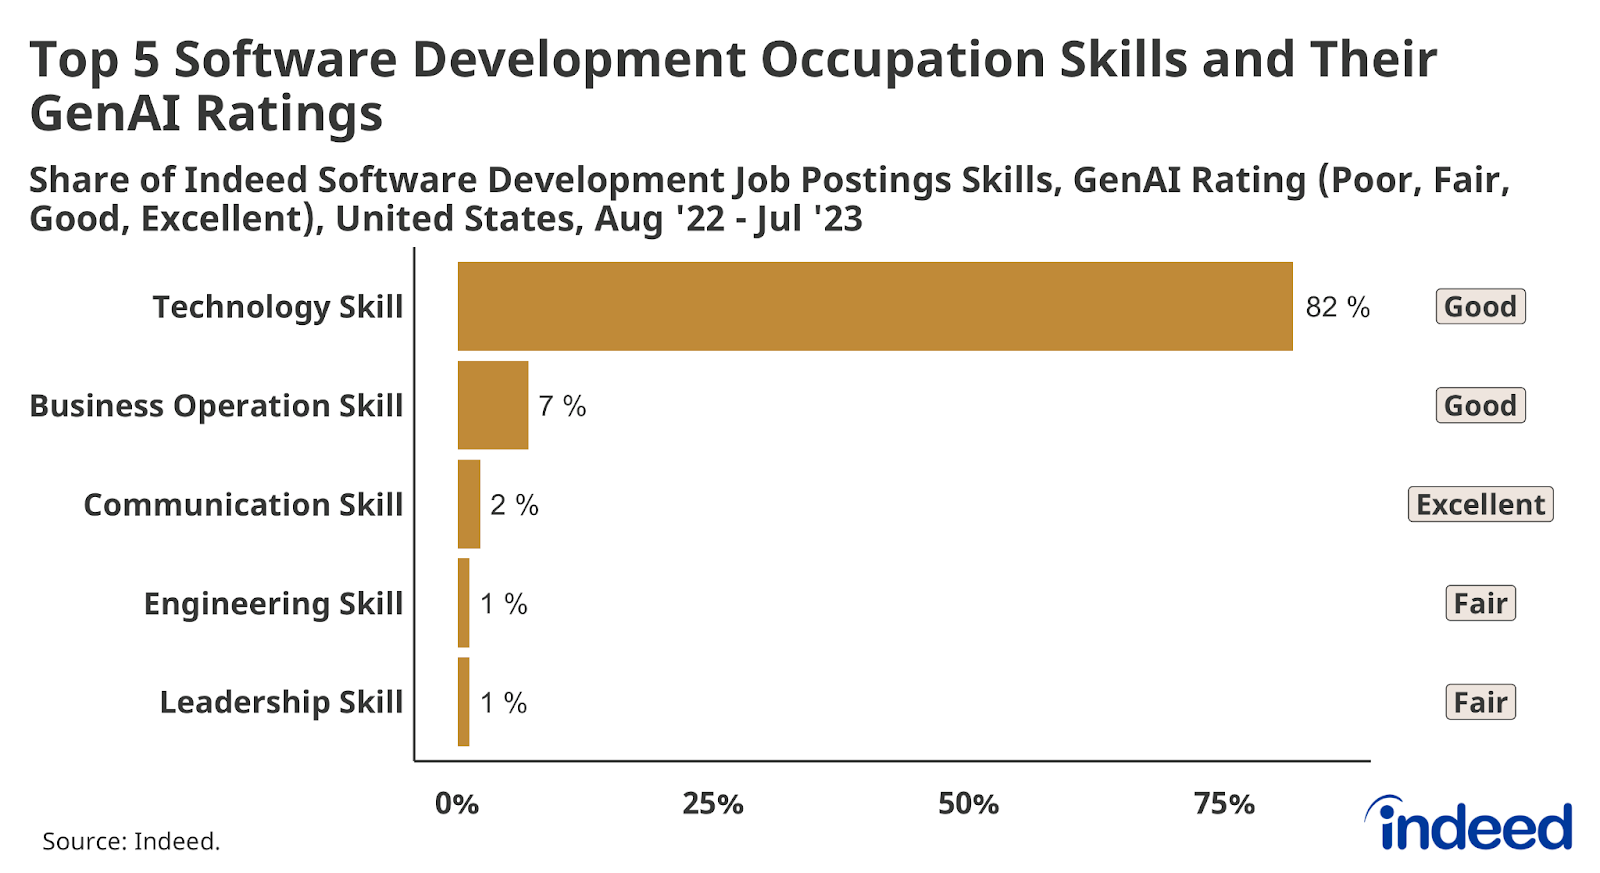 Bar graph titled “Top 5 Software Development Occupation Skills and Their GenAI Ratings.” With a vertical axis comprising the five software development skills, and a horizontal axis of 0% to 82%, the graph shows the GenAI rating for each share of job postings skills.